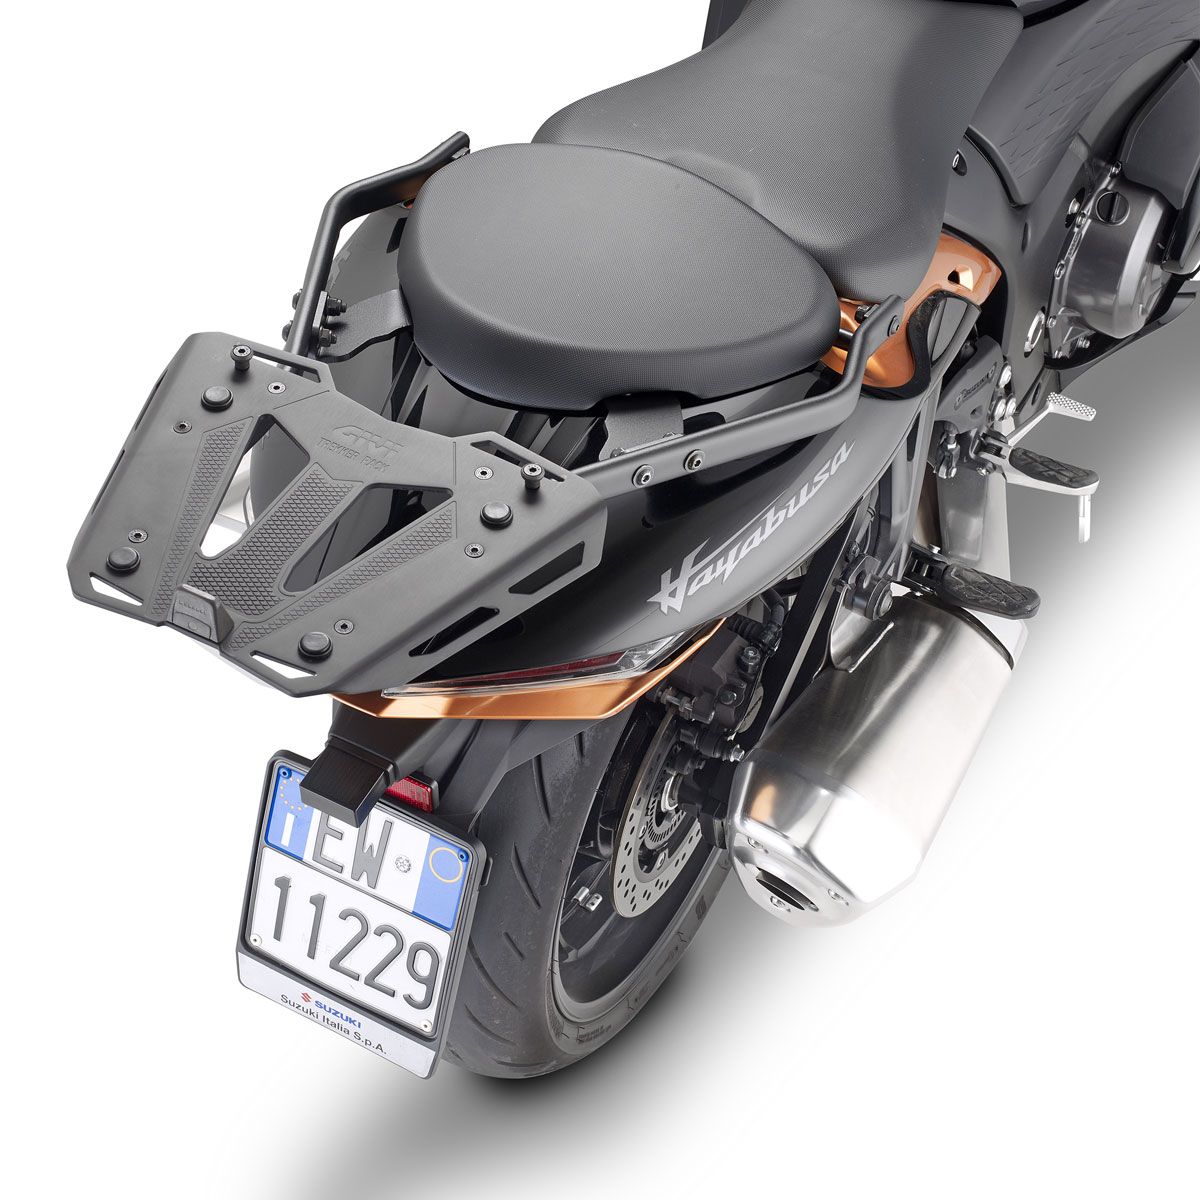 GIVI Motorcycle Luggage, Accessories, Engine Guards, Cases & more – giviusa